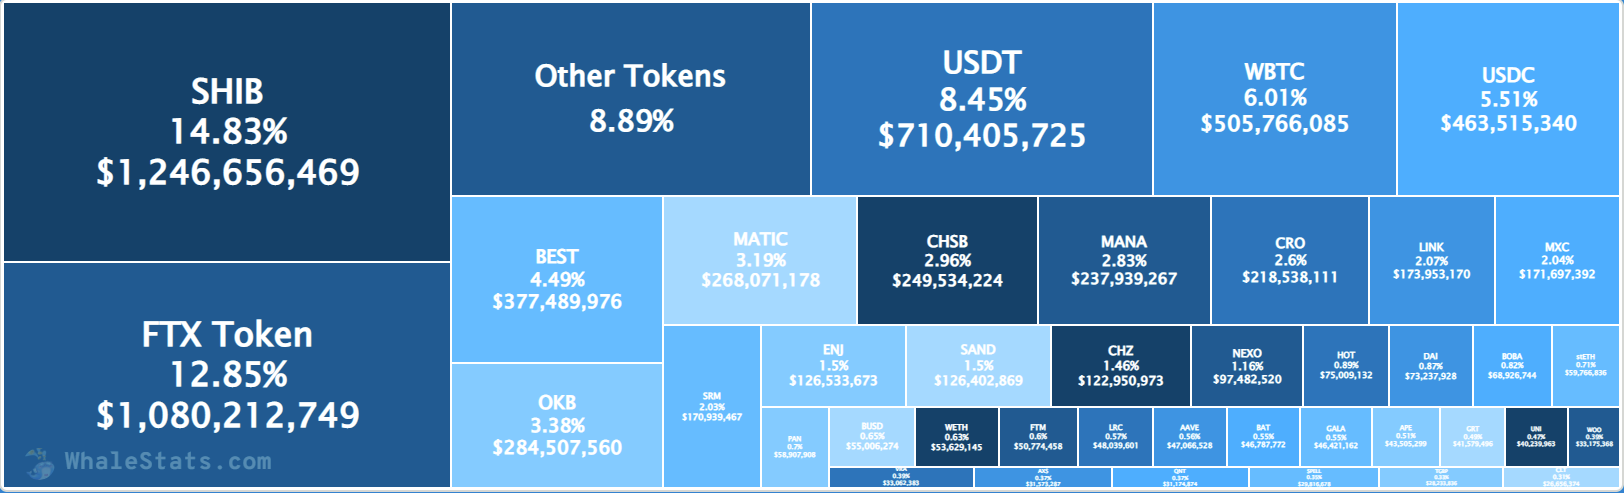 Another ETH Whale Purchases 70 Billion SHIB Token. Source: WhaleStats